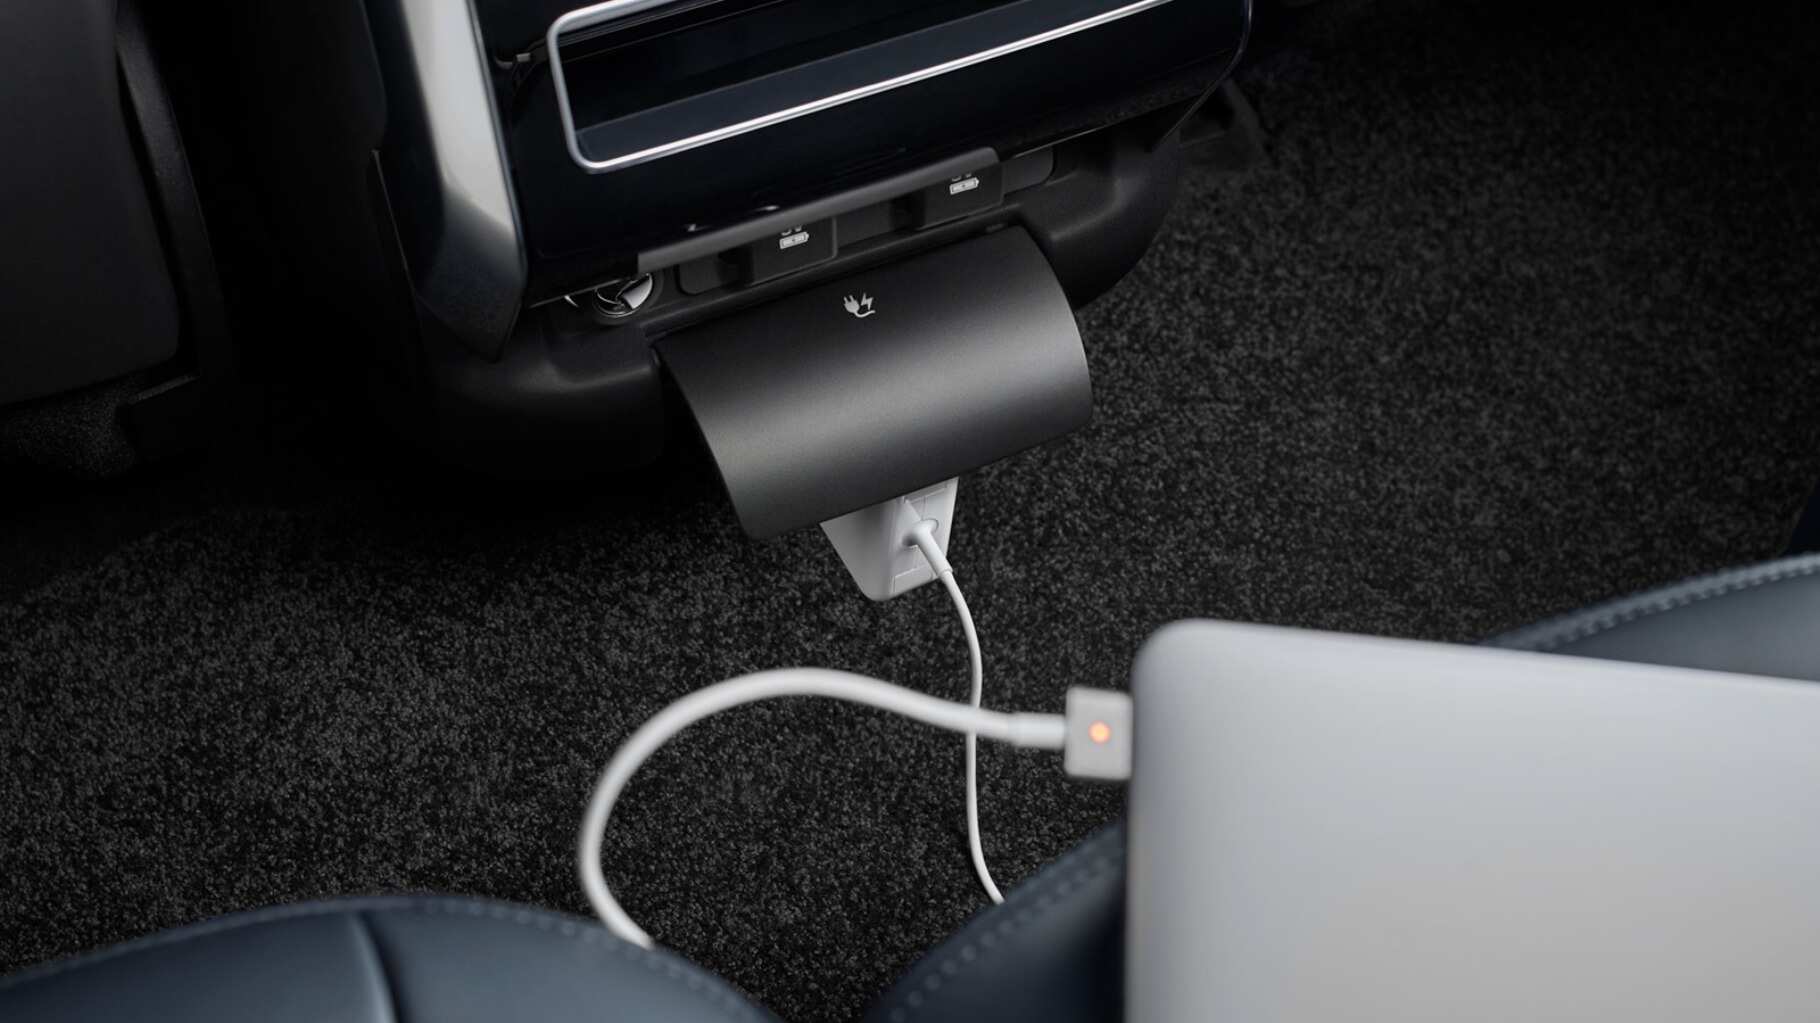 Range Rover Sport is available with two optional domestic plug sockets and five USB ports located throughout the cabin. 